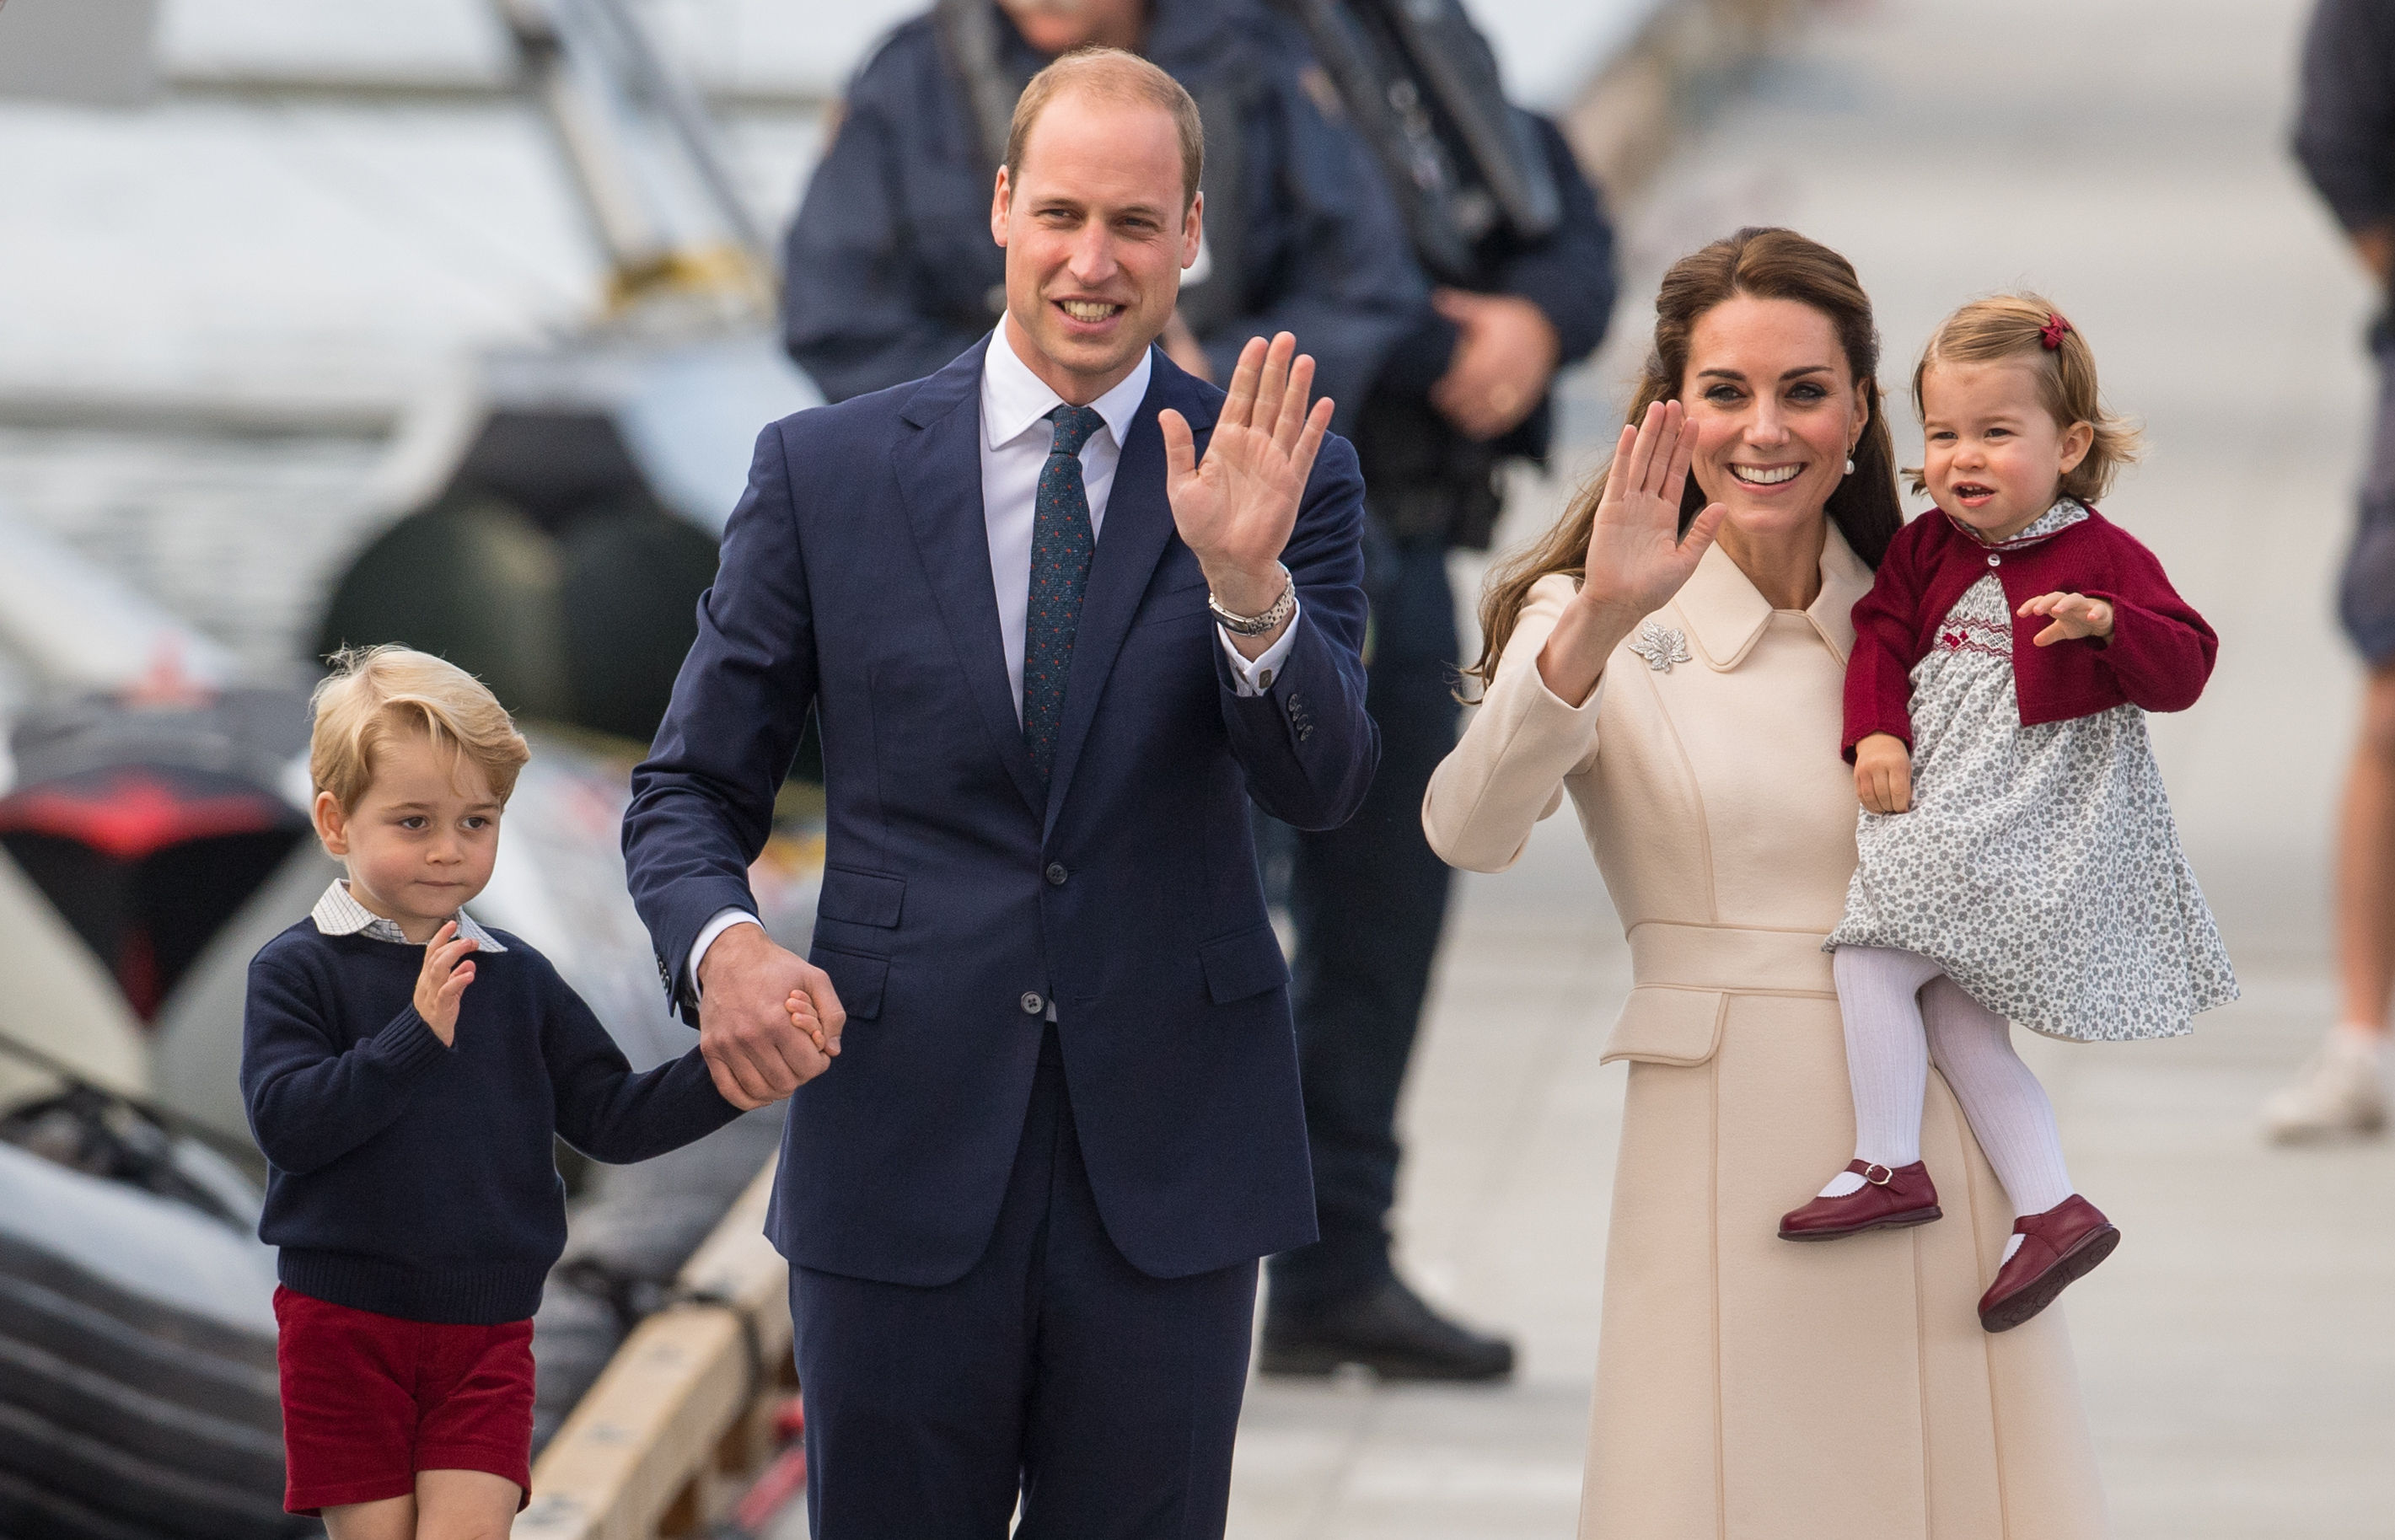 The Duke and Duchess of Cambridge are expecting their baby in April, it has been announced. (Dominic Lipinski/PA Wire)